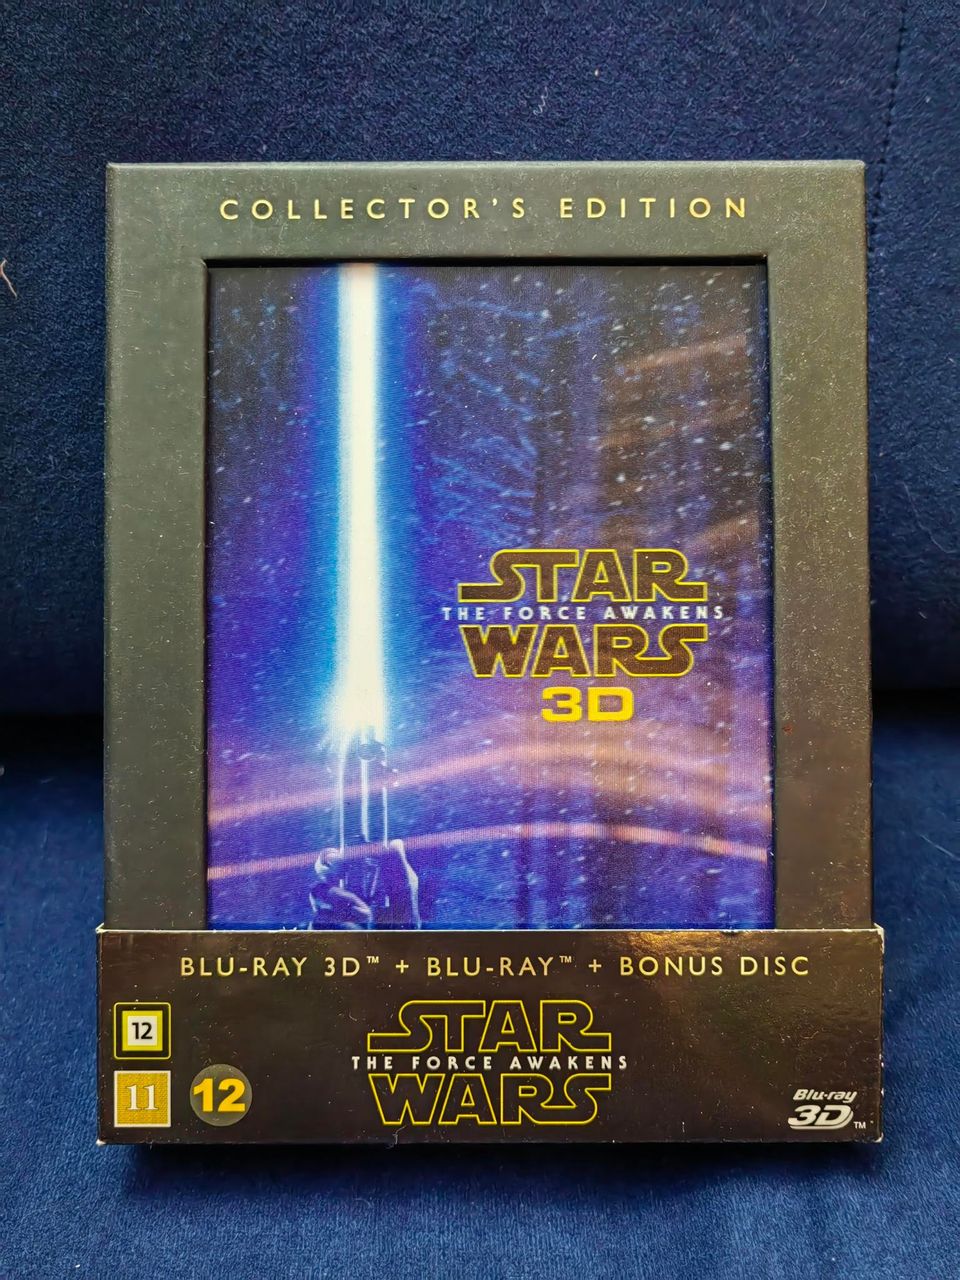 Star Wars The Force Awakens Collector's Edition 3D Blu-Ray